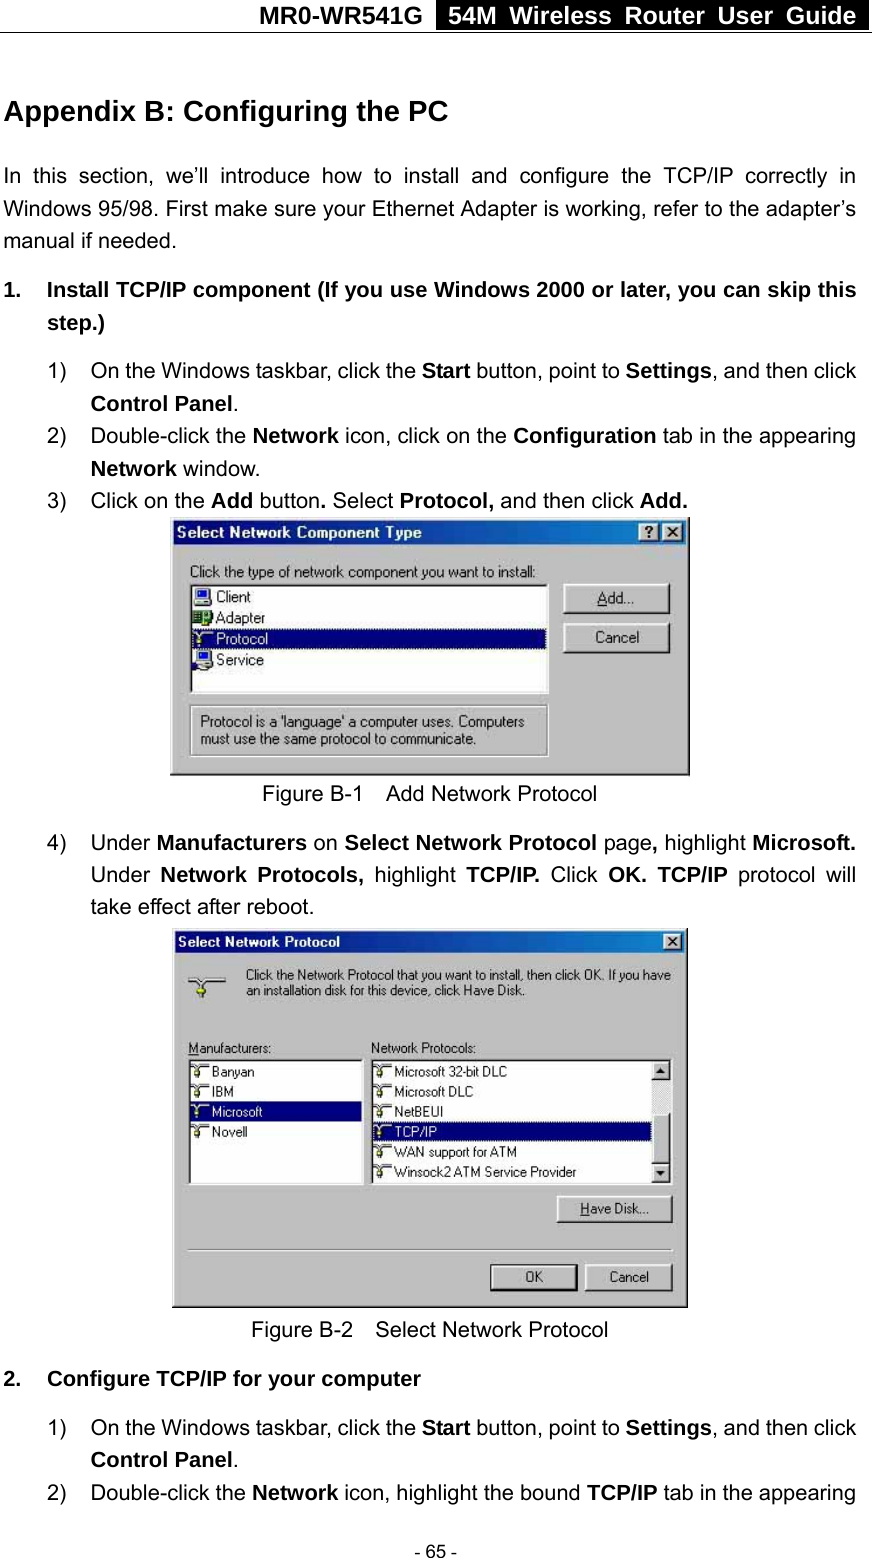 MR0-WR541G   54M Wireless Router User Guide  Appendix B: Configuring the PC In this section, we’ll introduce how to install and configure the TCP/IP correctly in Windows 95/98. First make sure your Ethernet Adapter is working, refer to the adapter’s manual if needed.   1.  Install TCP/IP component (If you use Windows 2000 or later, you can skip this step.) 1)  On the Windows taskbar, click the Start button, point to Settings, and then click Control Panel. 2) Double-click the Network icon, click on the Configuration tab in the appearing Network window.  3)  Click on the Add button. Select Protocol, and then click Add.  Figure B-1    Add Network Protocol 4) Under Manufacturers on Select Network Protocol page, highlight Microsoft. Under Network Protocols, highlight TCP/IP. Click OK. TCP/IP protocol will take effect after reboot.  Figure B-2    Select Network Protocol 2.  Configure TCP/IP for your computer 1)  On the Windows taskbar, click the Start button, point to Settings, and then click Control Panel. 2) Double-click the Network icon, highlight the bound TCP/IP tab in the appearing  - 65 - 